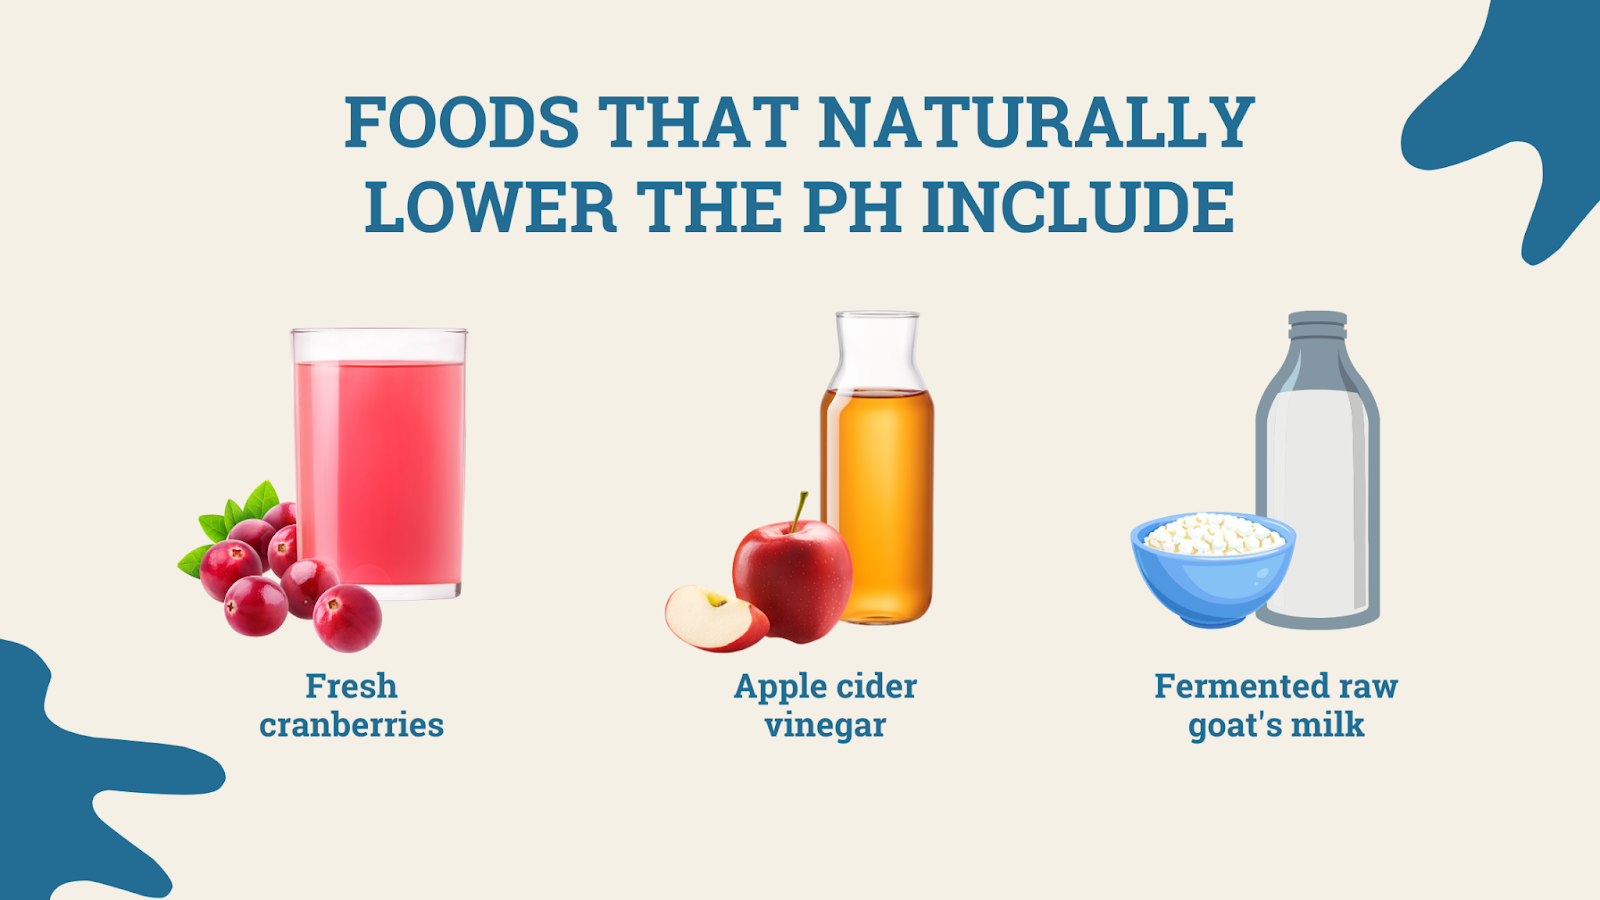 Foods that naturally lower the pH